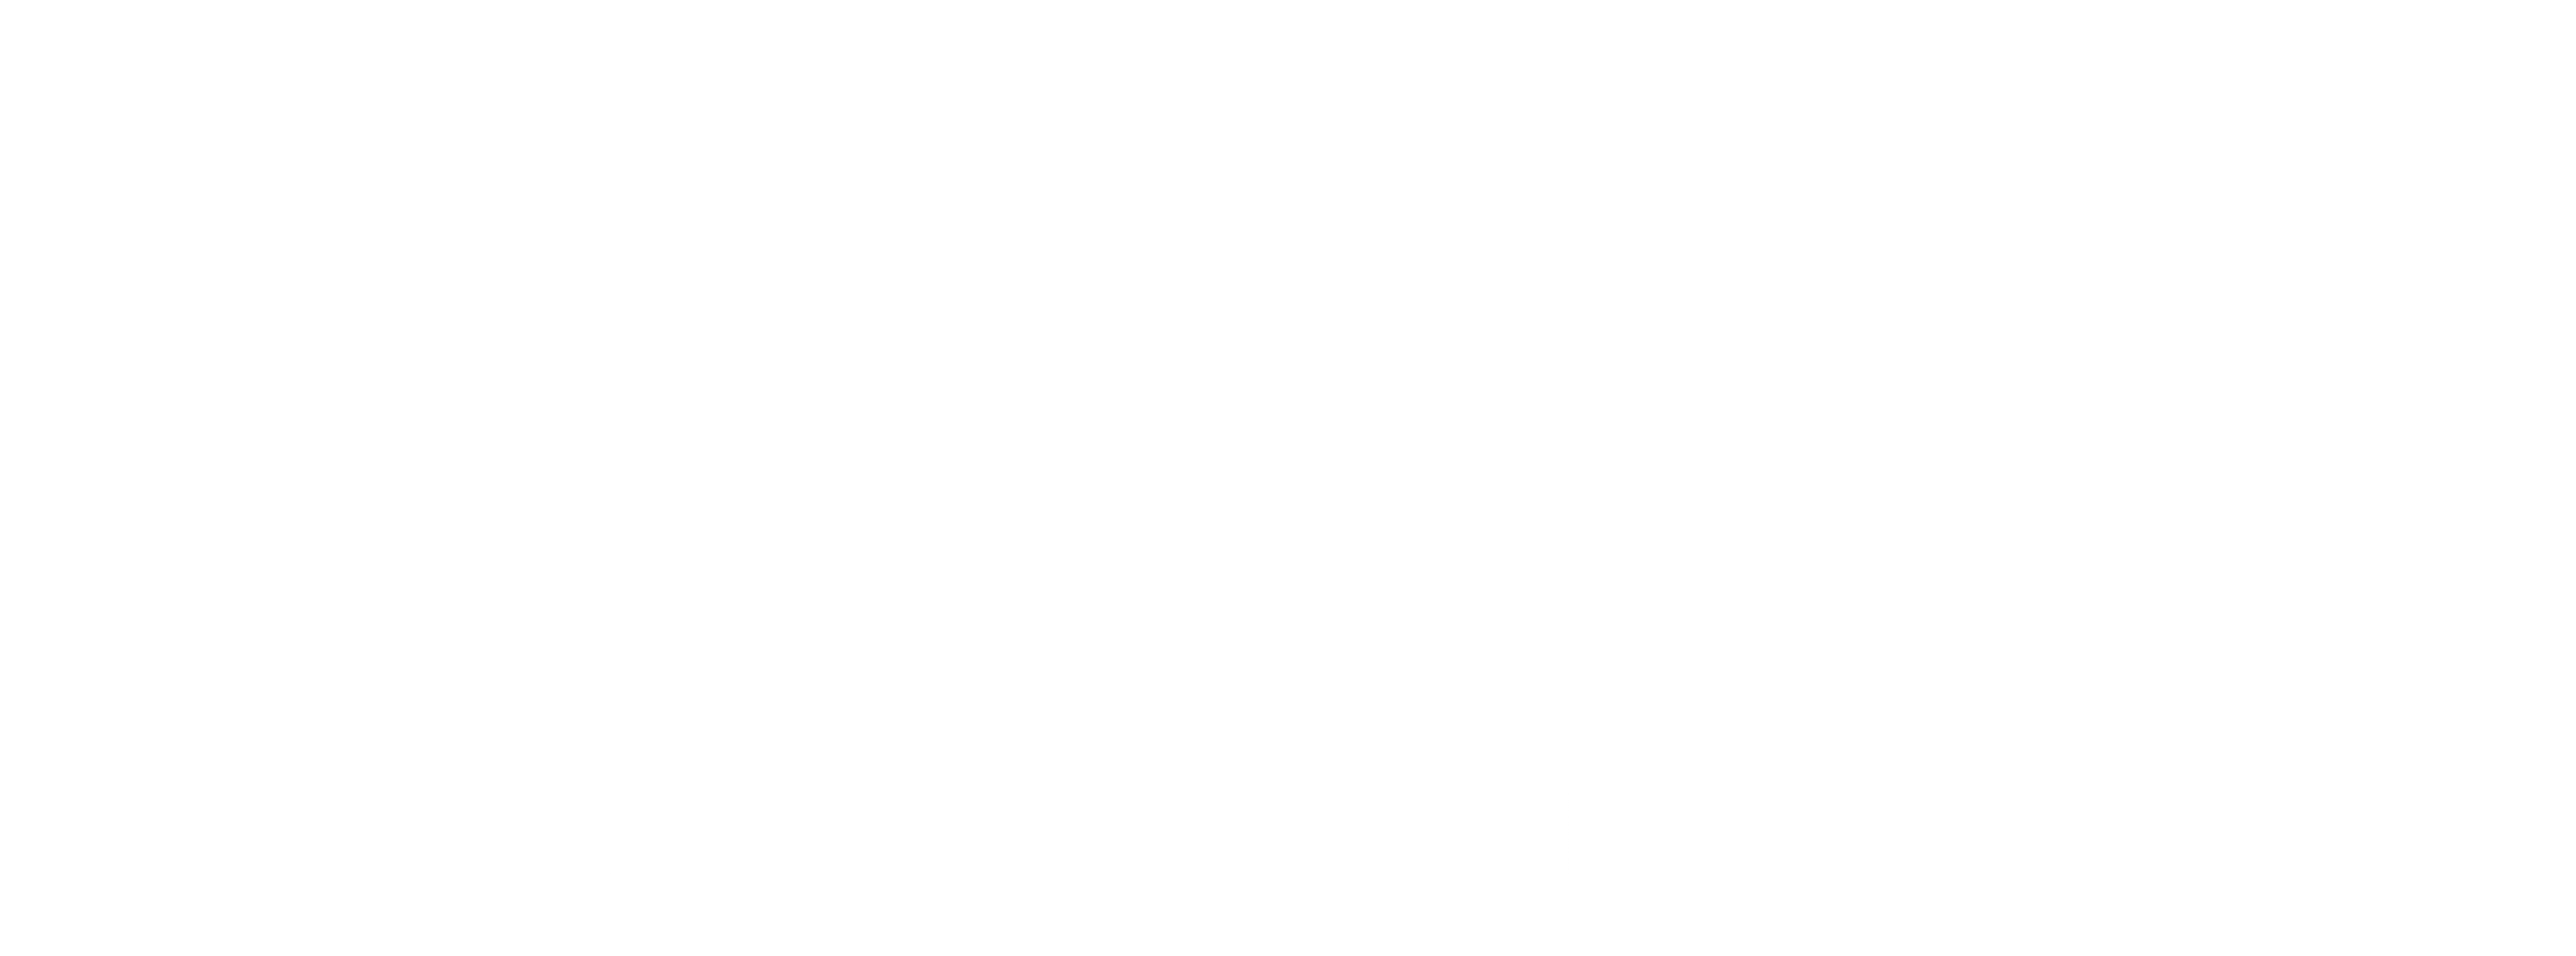 Younger Property Management